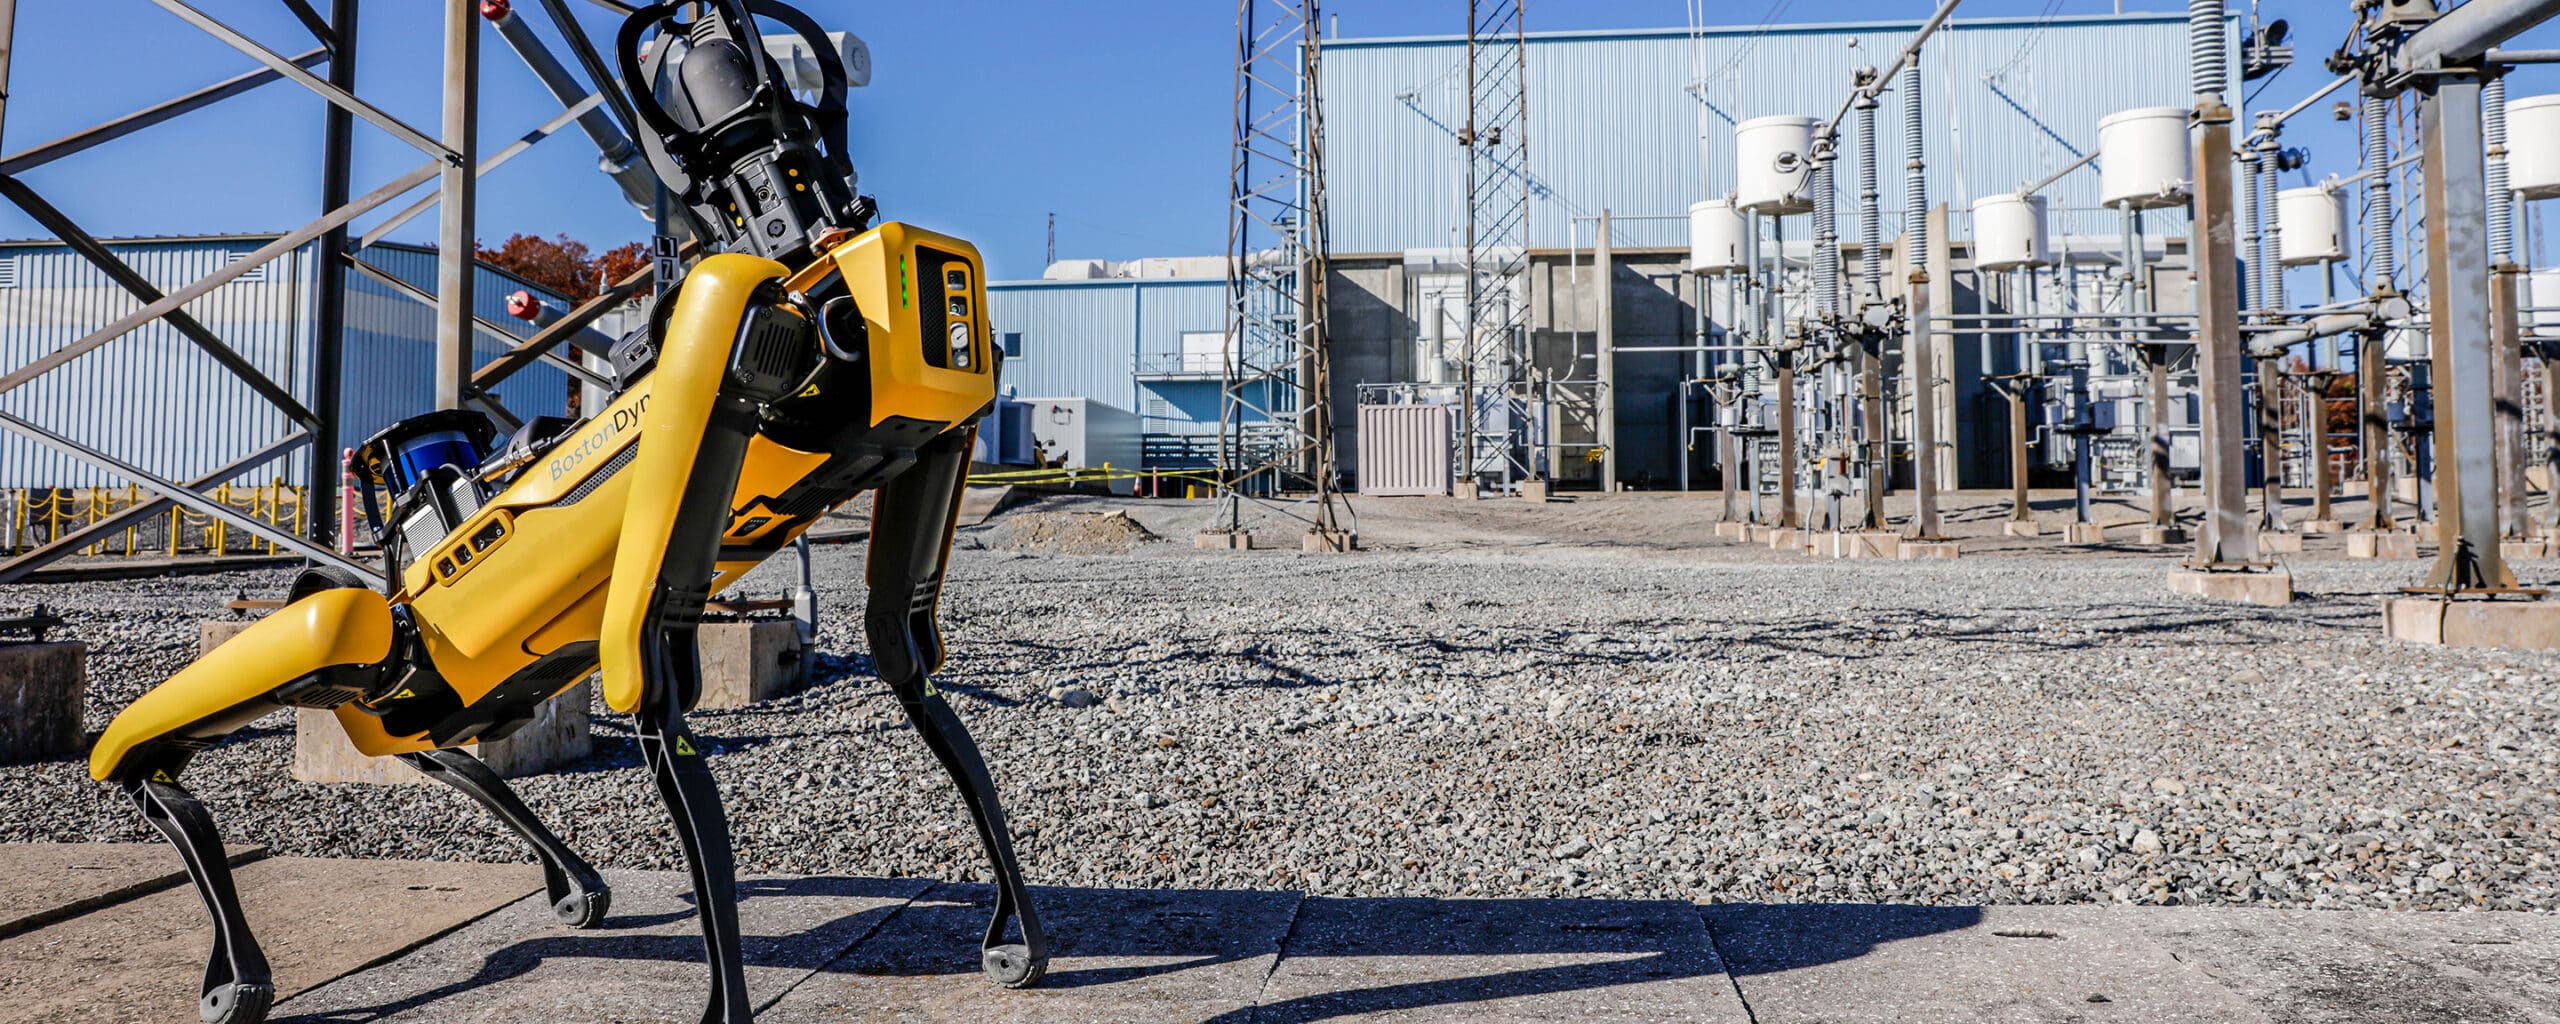 The Spot robot performs inspections at an electric utility